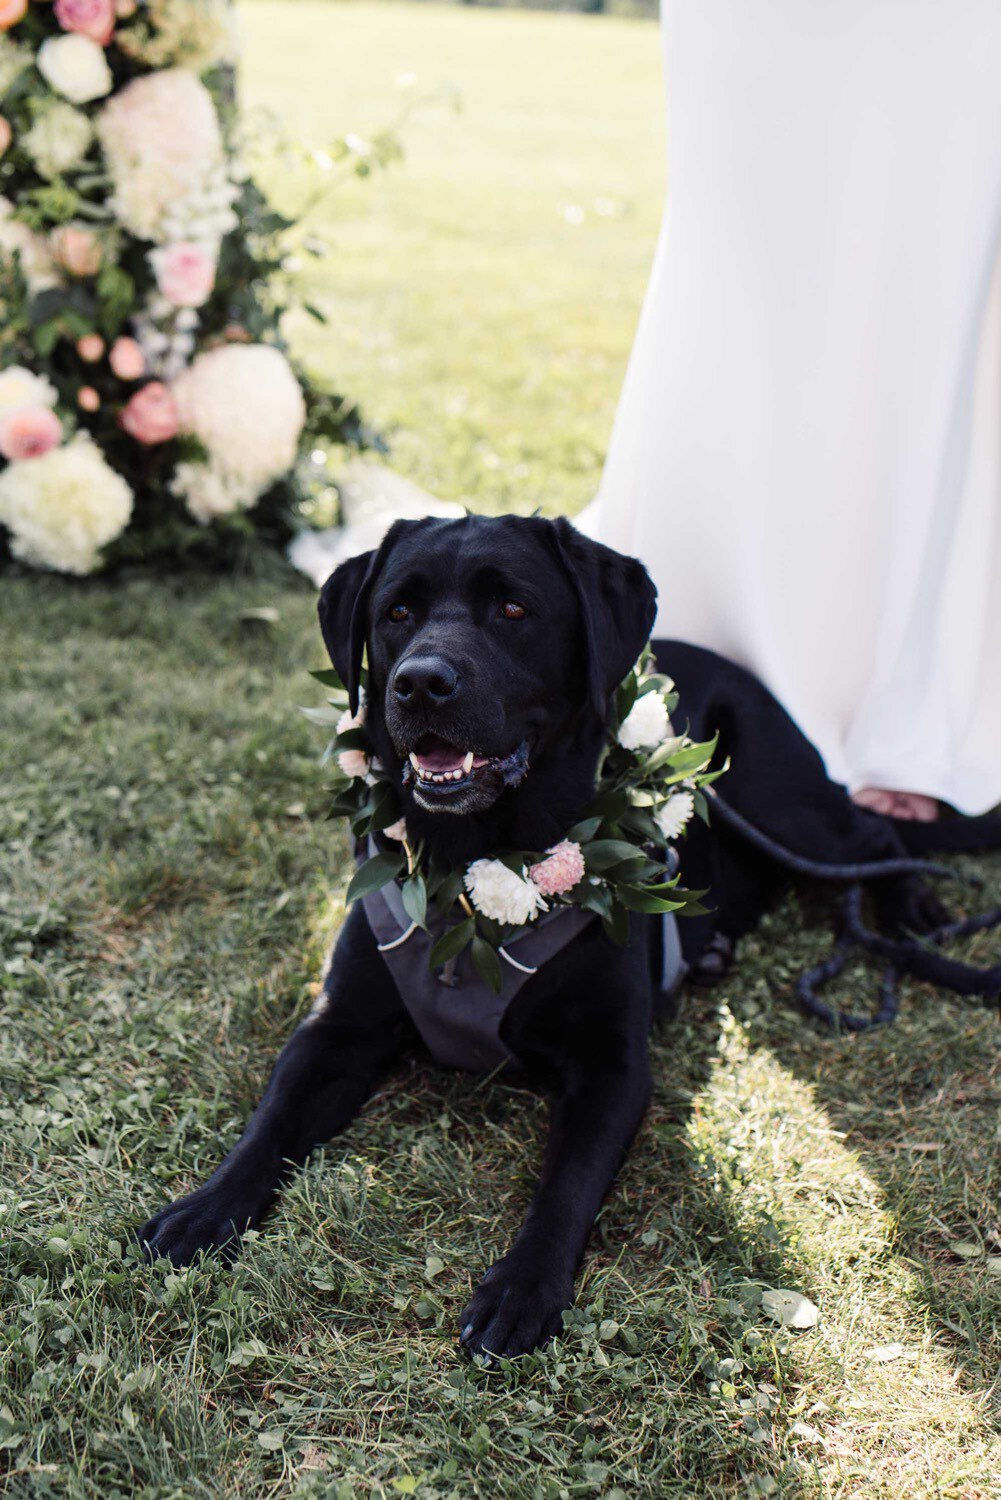 Harley the dog on wedding day with a flower collar